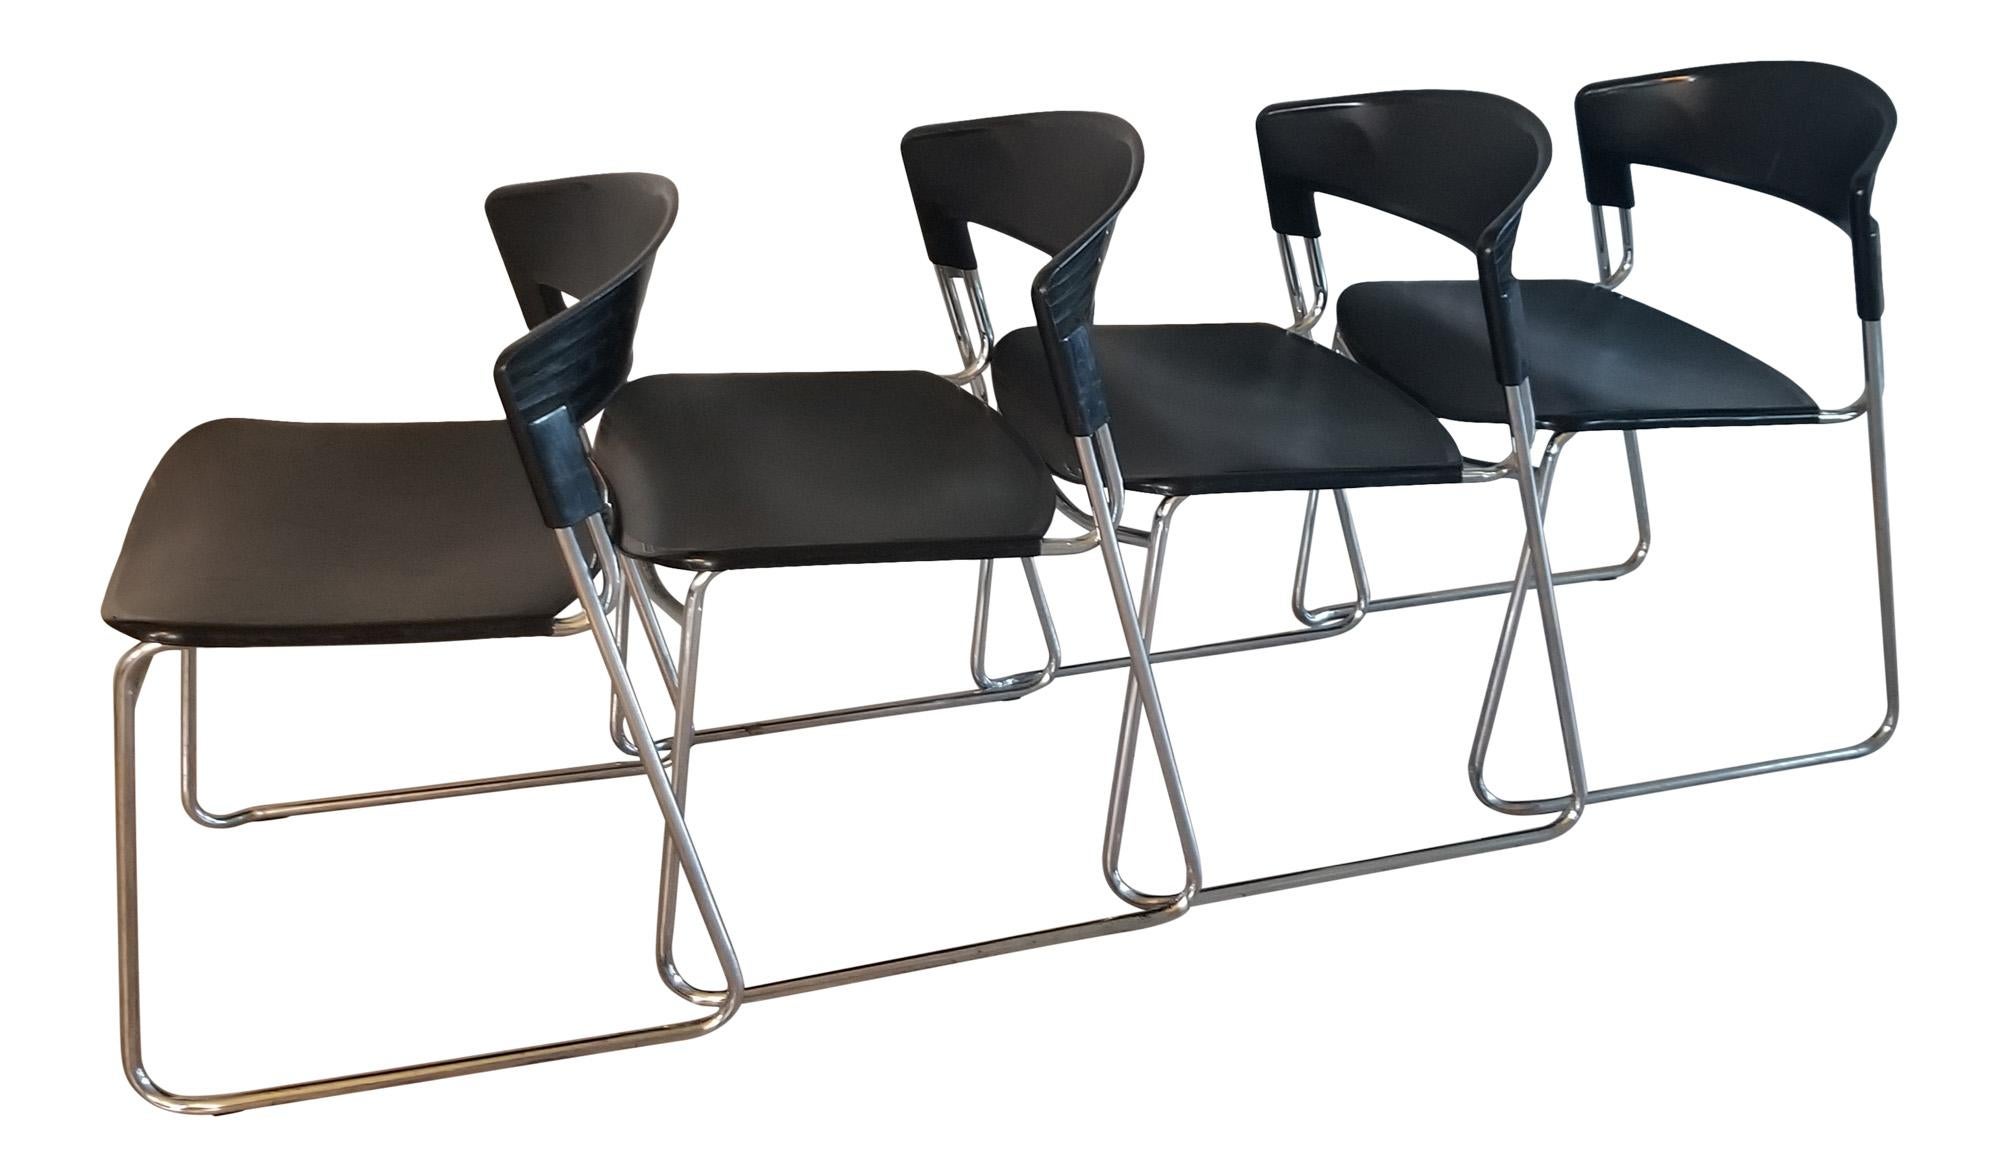 Stackable Chairs
From ITALY by architect designer Paolo Favaretto set of Four Tubular Chrome Chairs in Black
Post Modern Versatility Stackable & Stylish designed in 1986
Style Assisa; chairs are made with tubular chrome structure & polypropylene